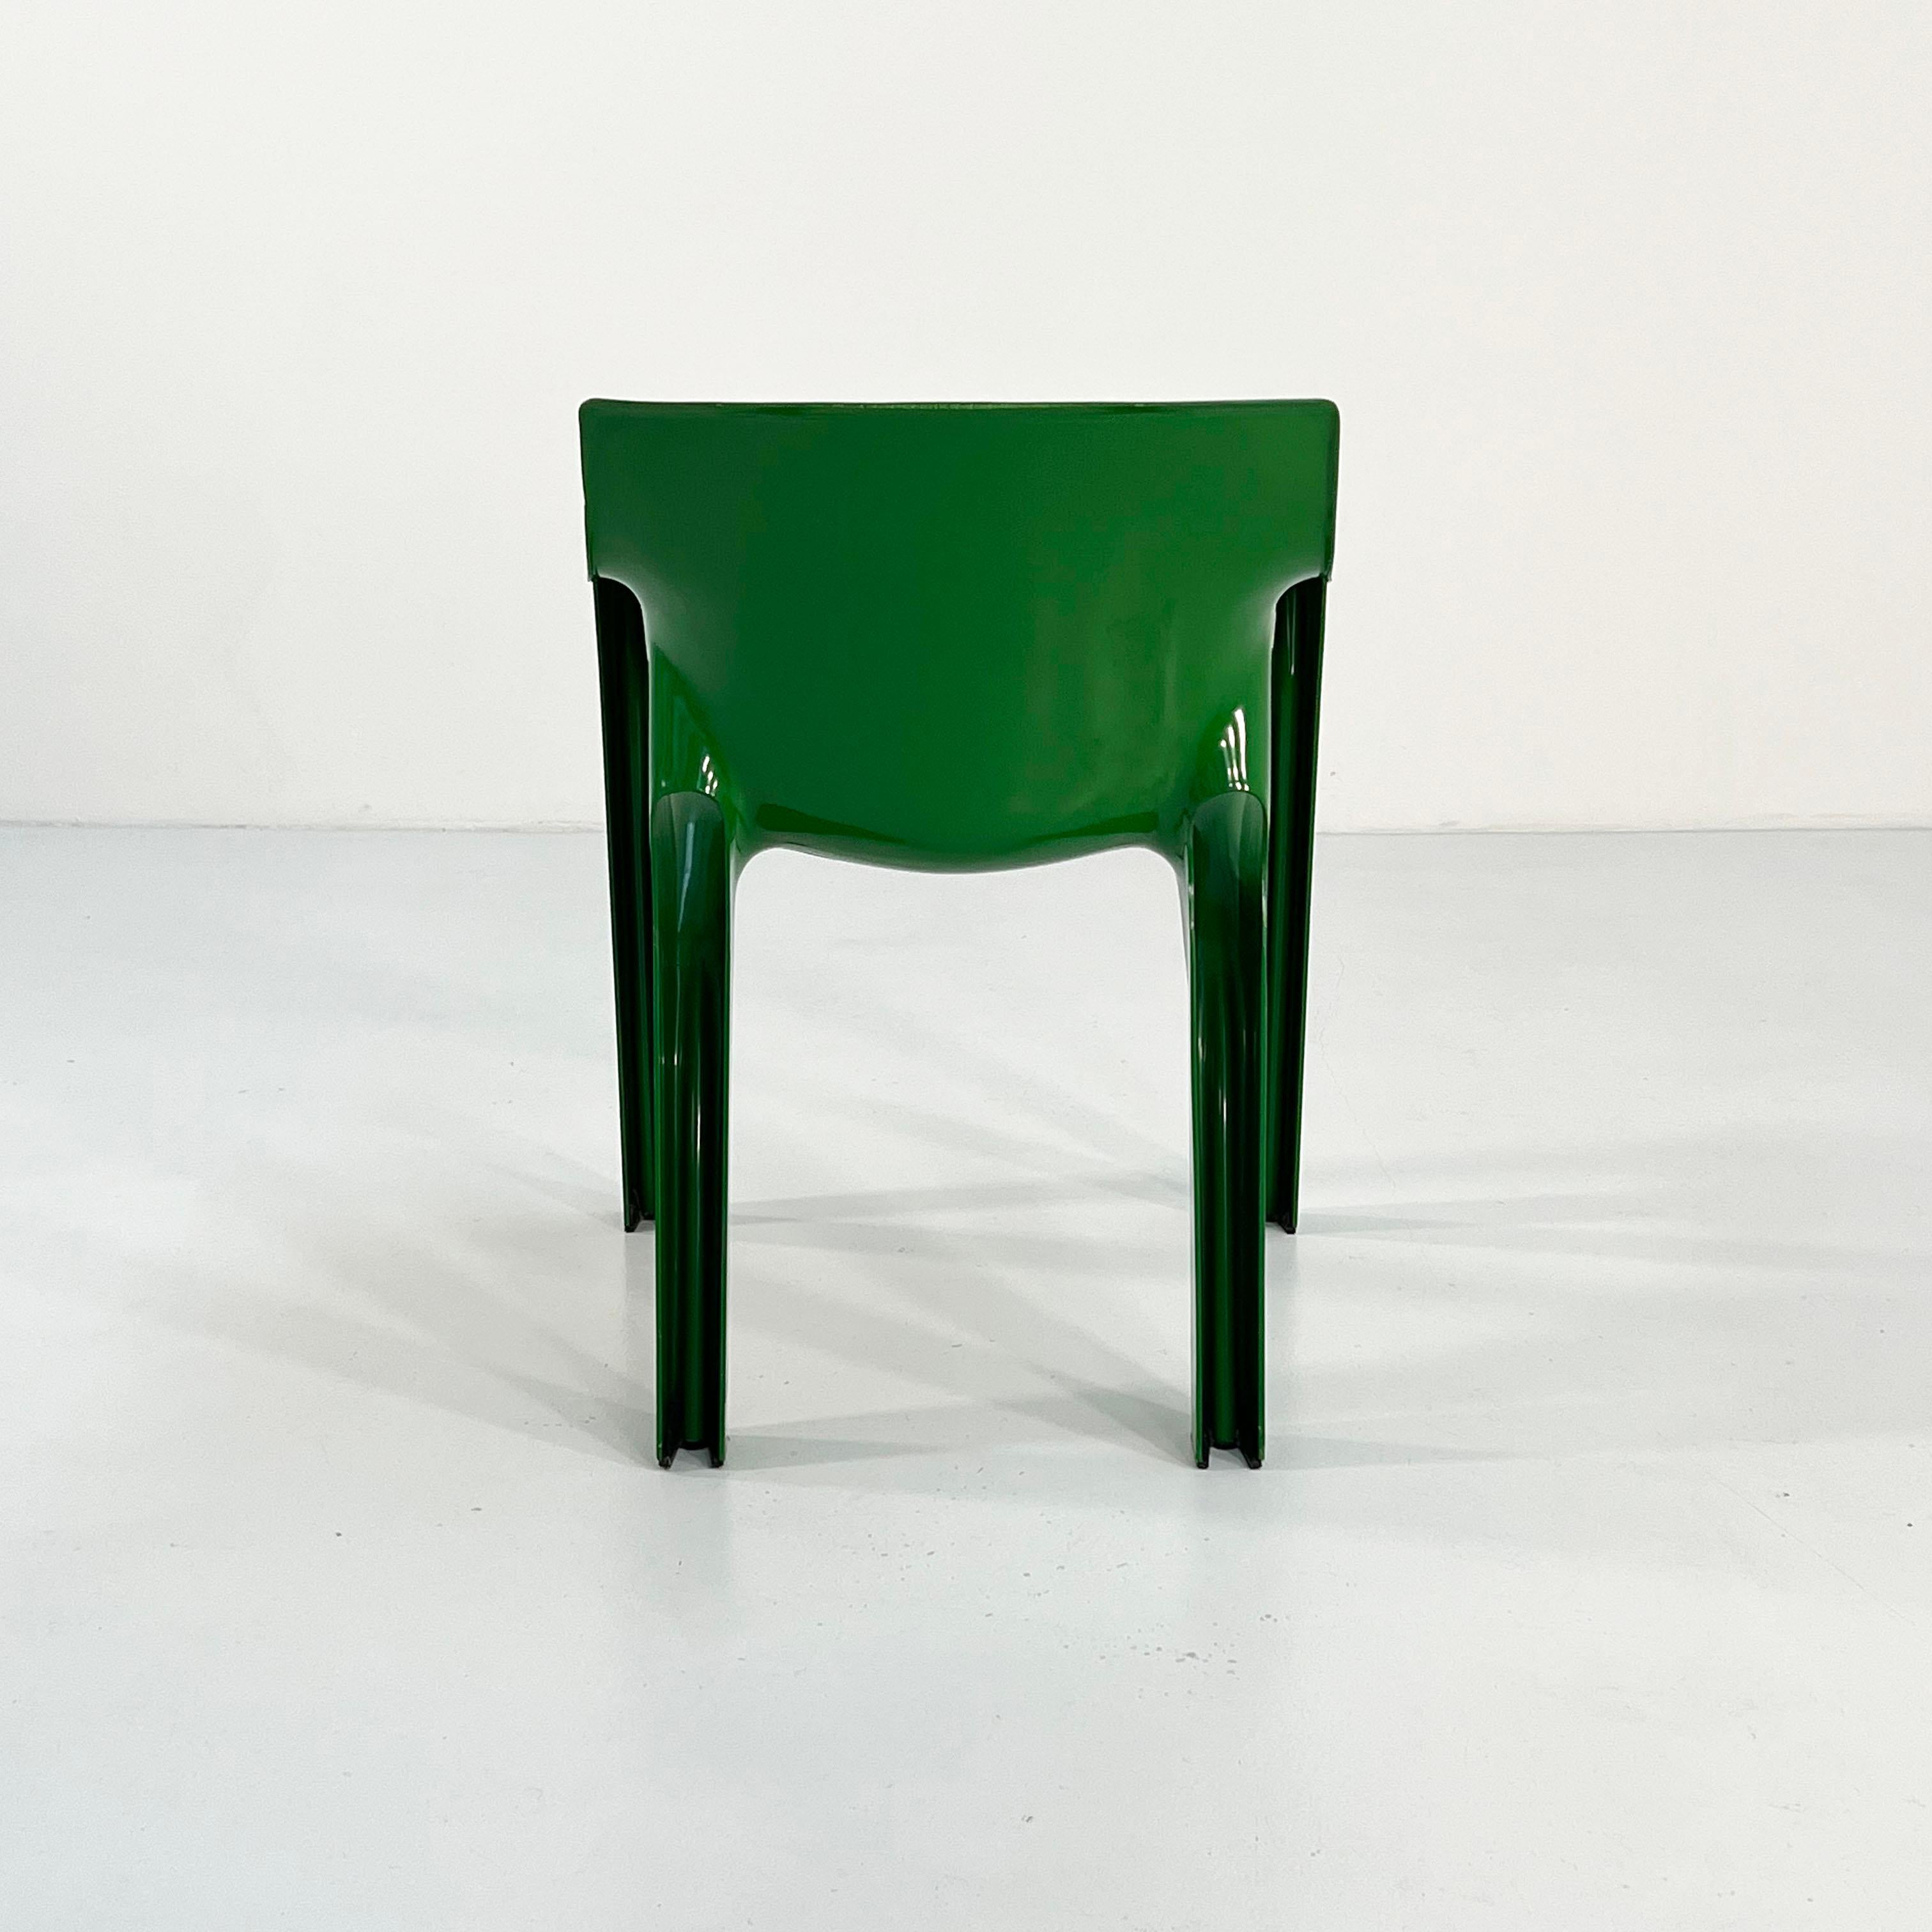 Late 20th Century Green Gaudi Chair by Vico Magistretti for Artemide, 1970s